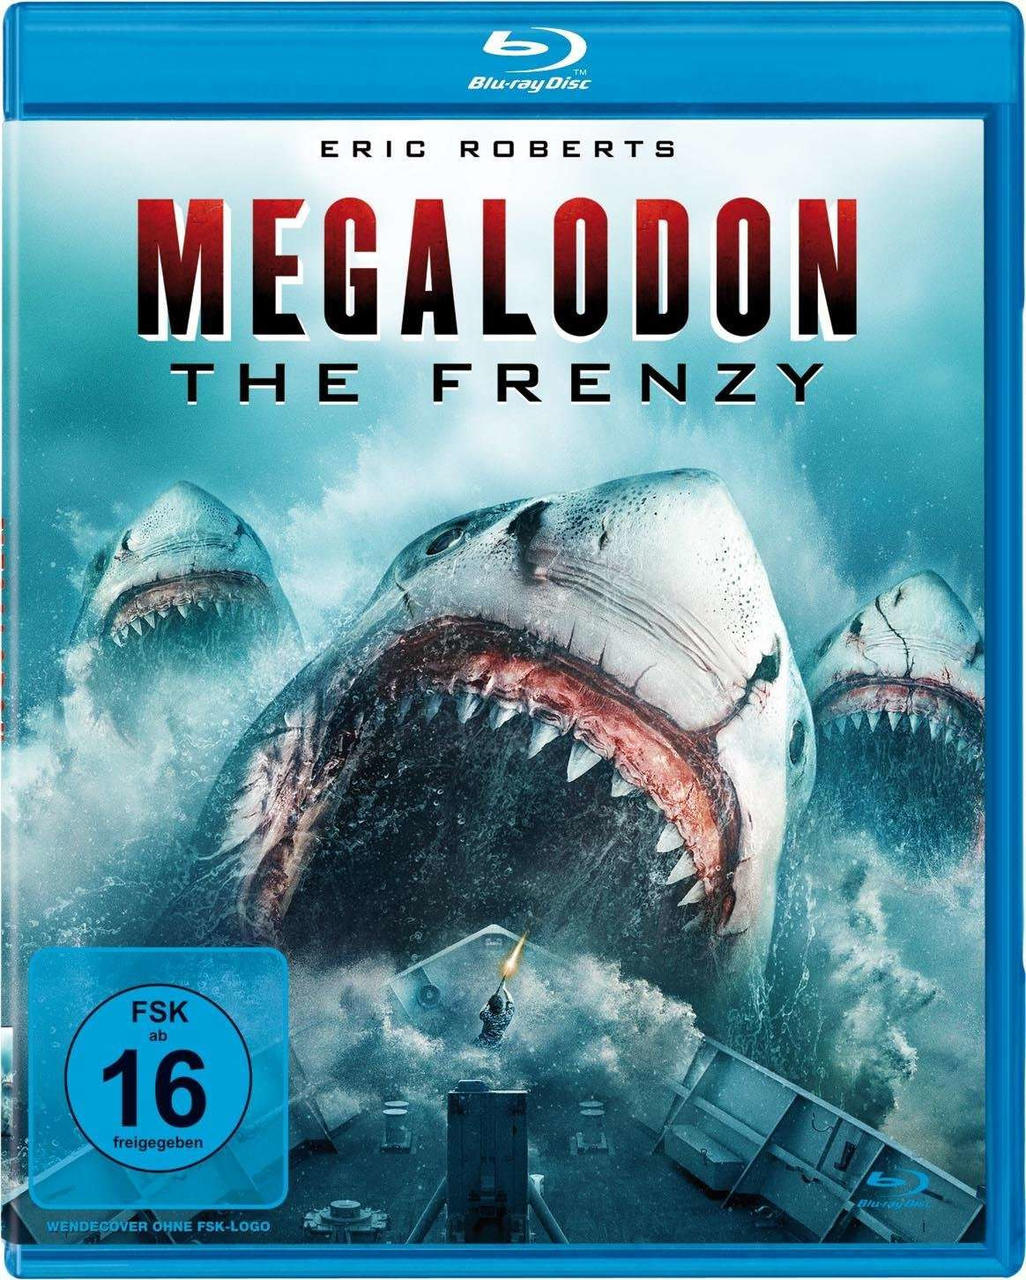 Blu-ray Megalodon Frenzy The -